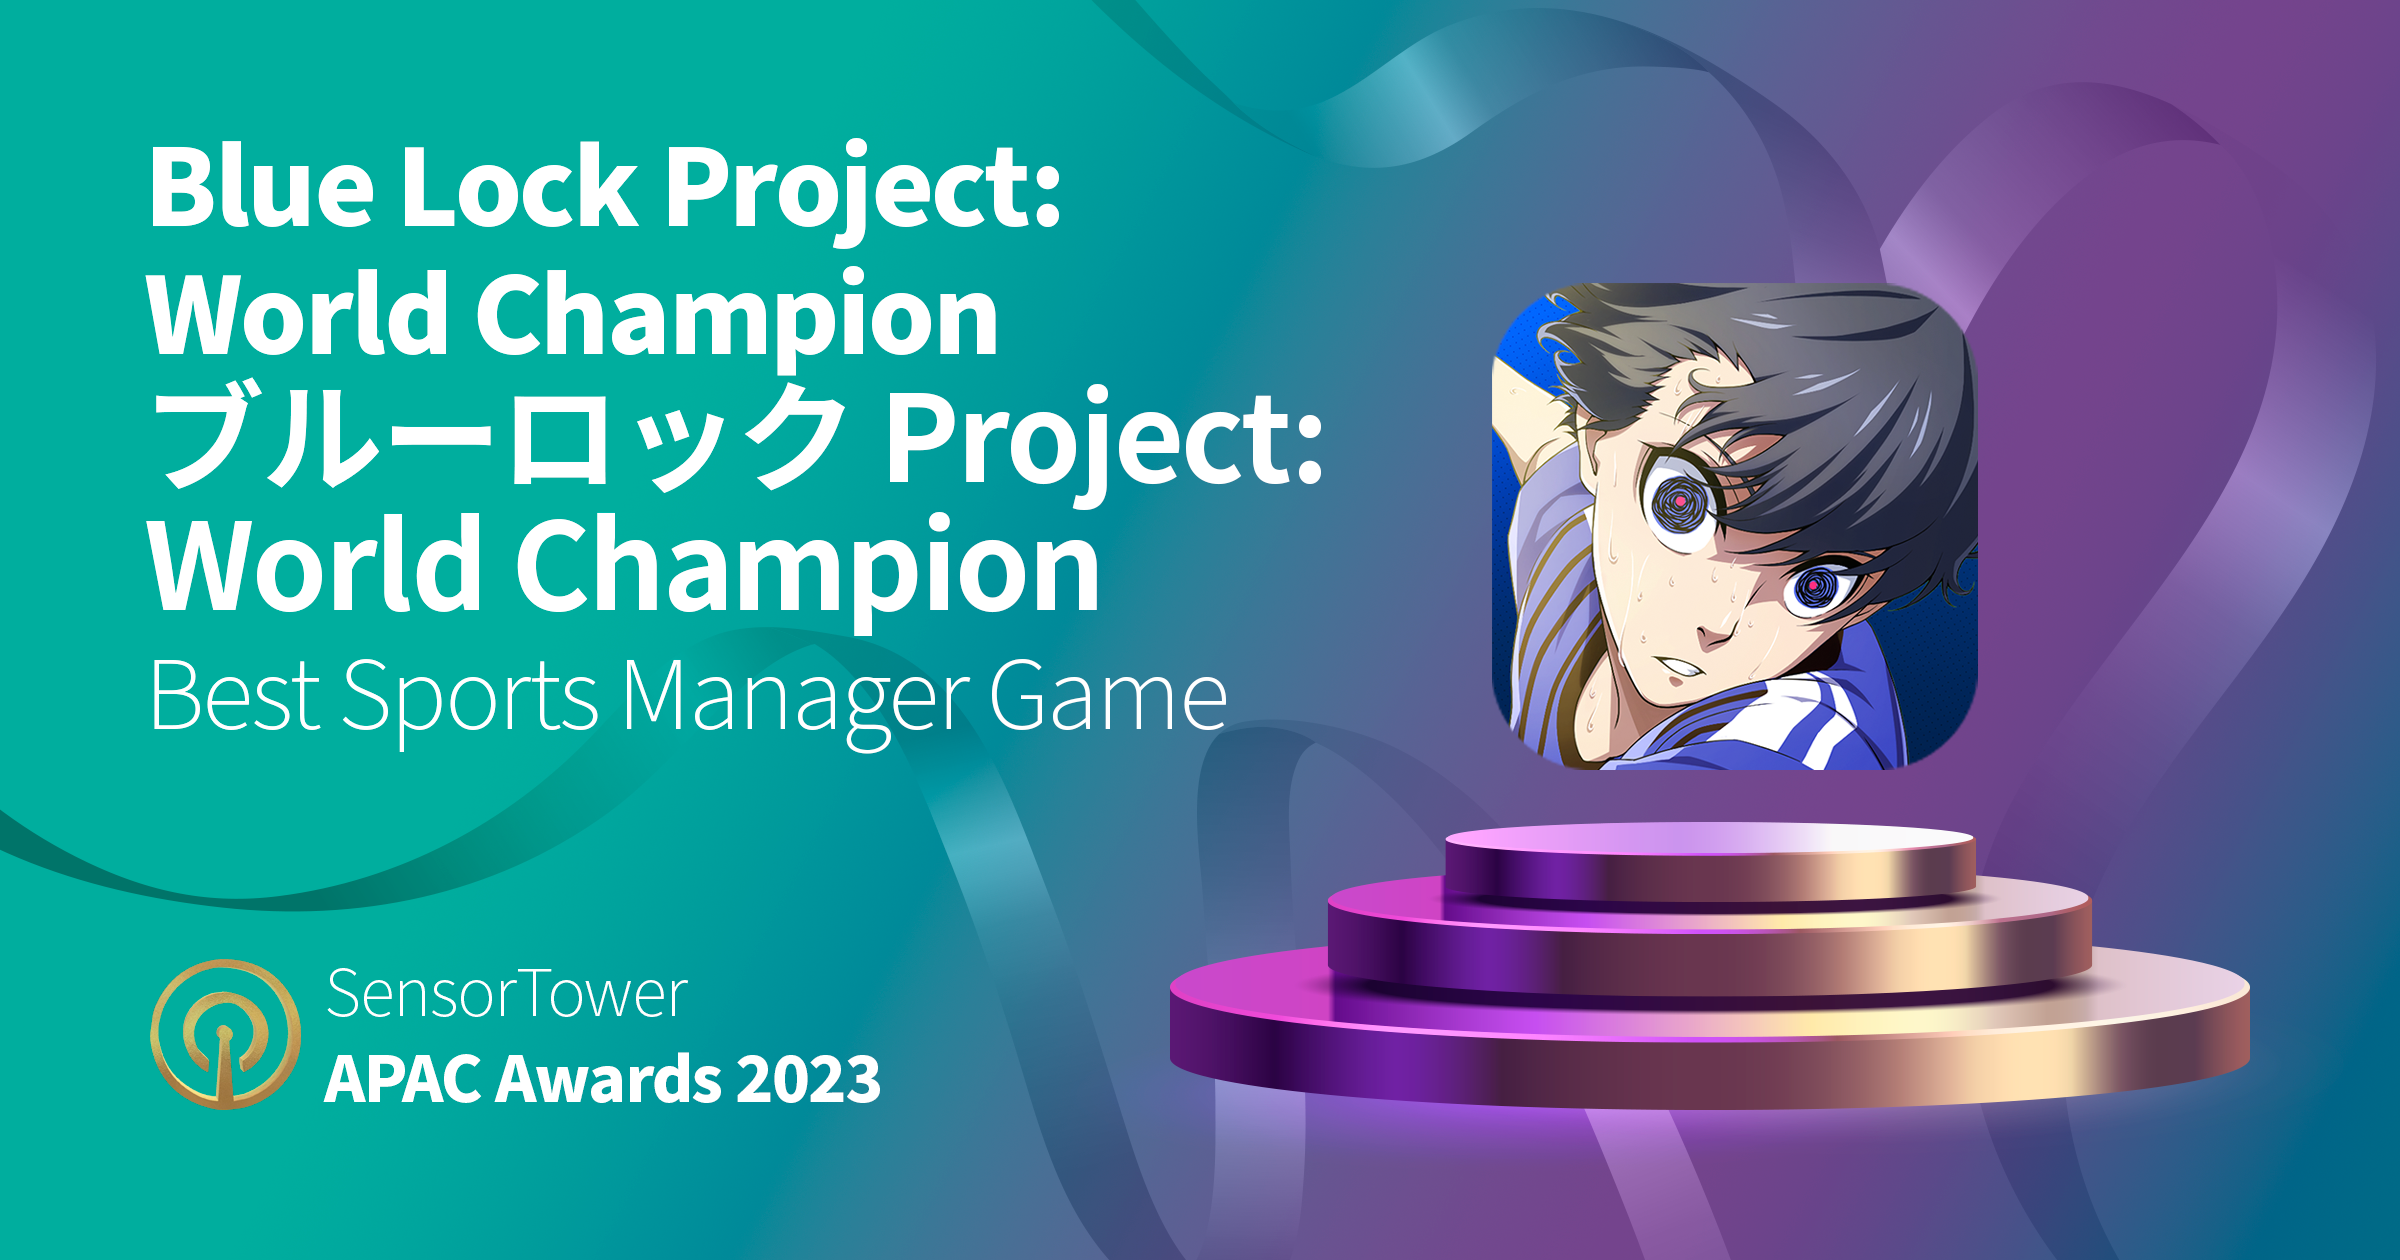 Blue Lock Project (Best Sports Manager Game)